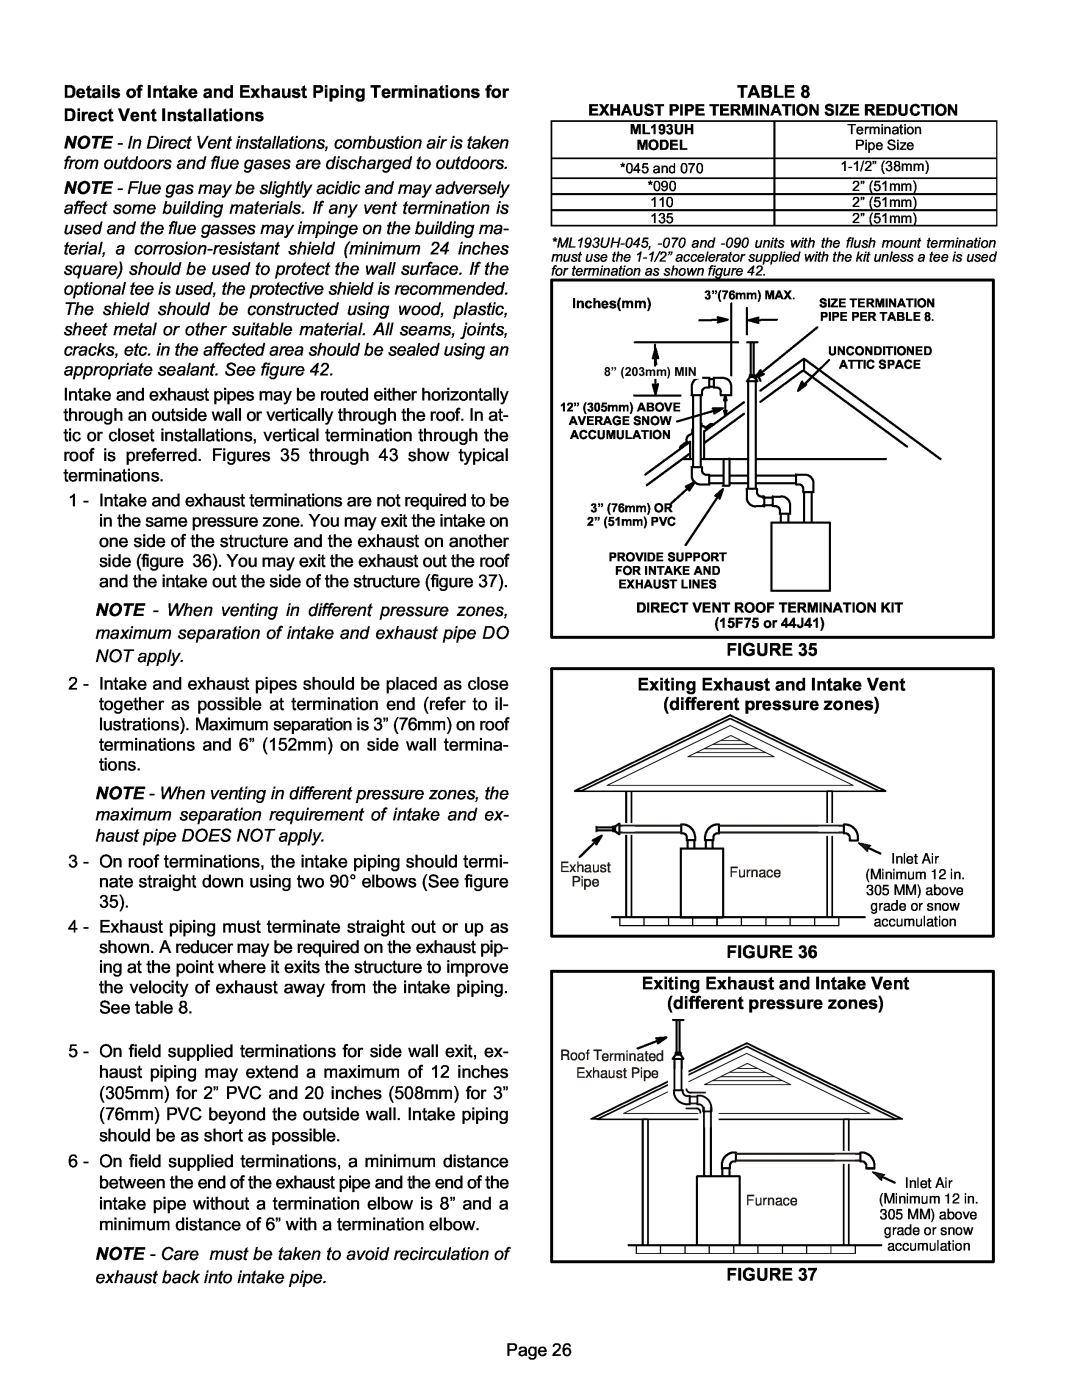 Lennox International Inc ML193UH installation instructions FIGURE Exiting Exhaust and Intake Vent, different pressure zones 